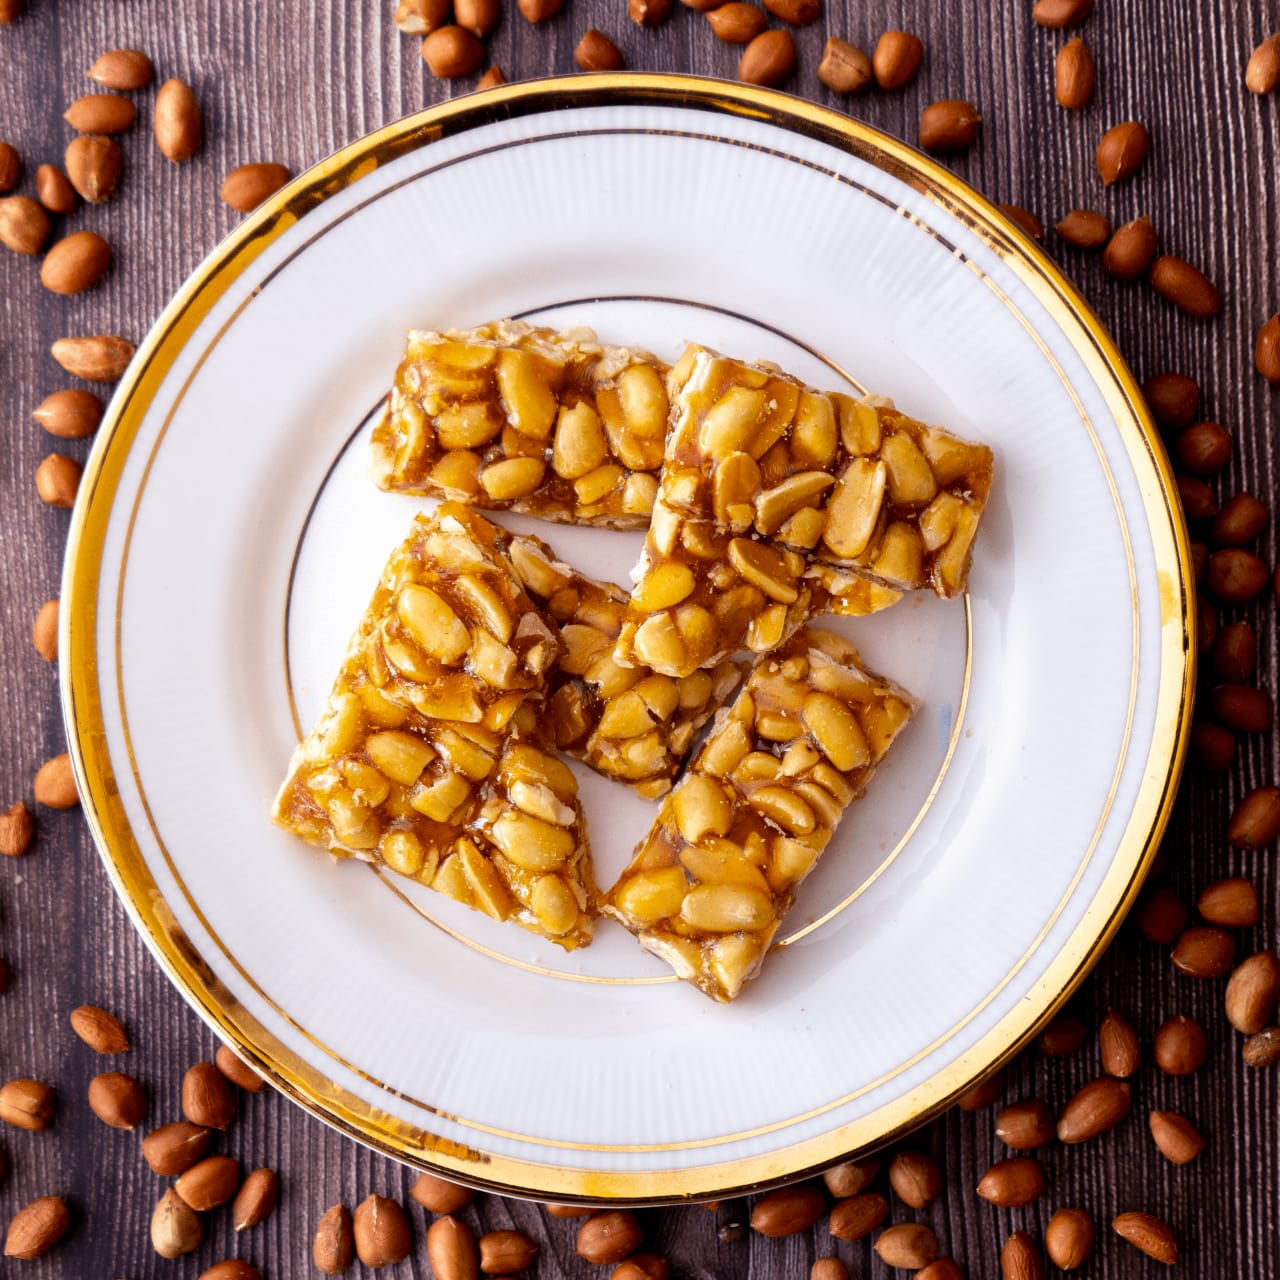 Shop Groundnut Chikki 400 gms online at best prices on The State Plate